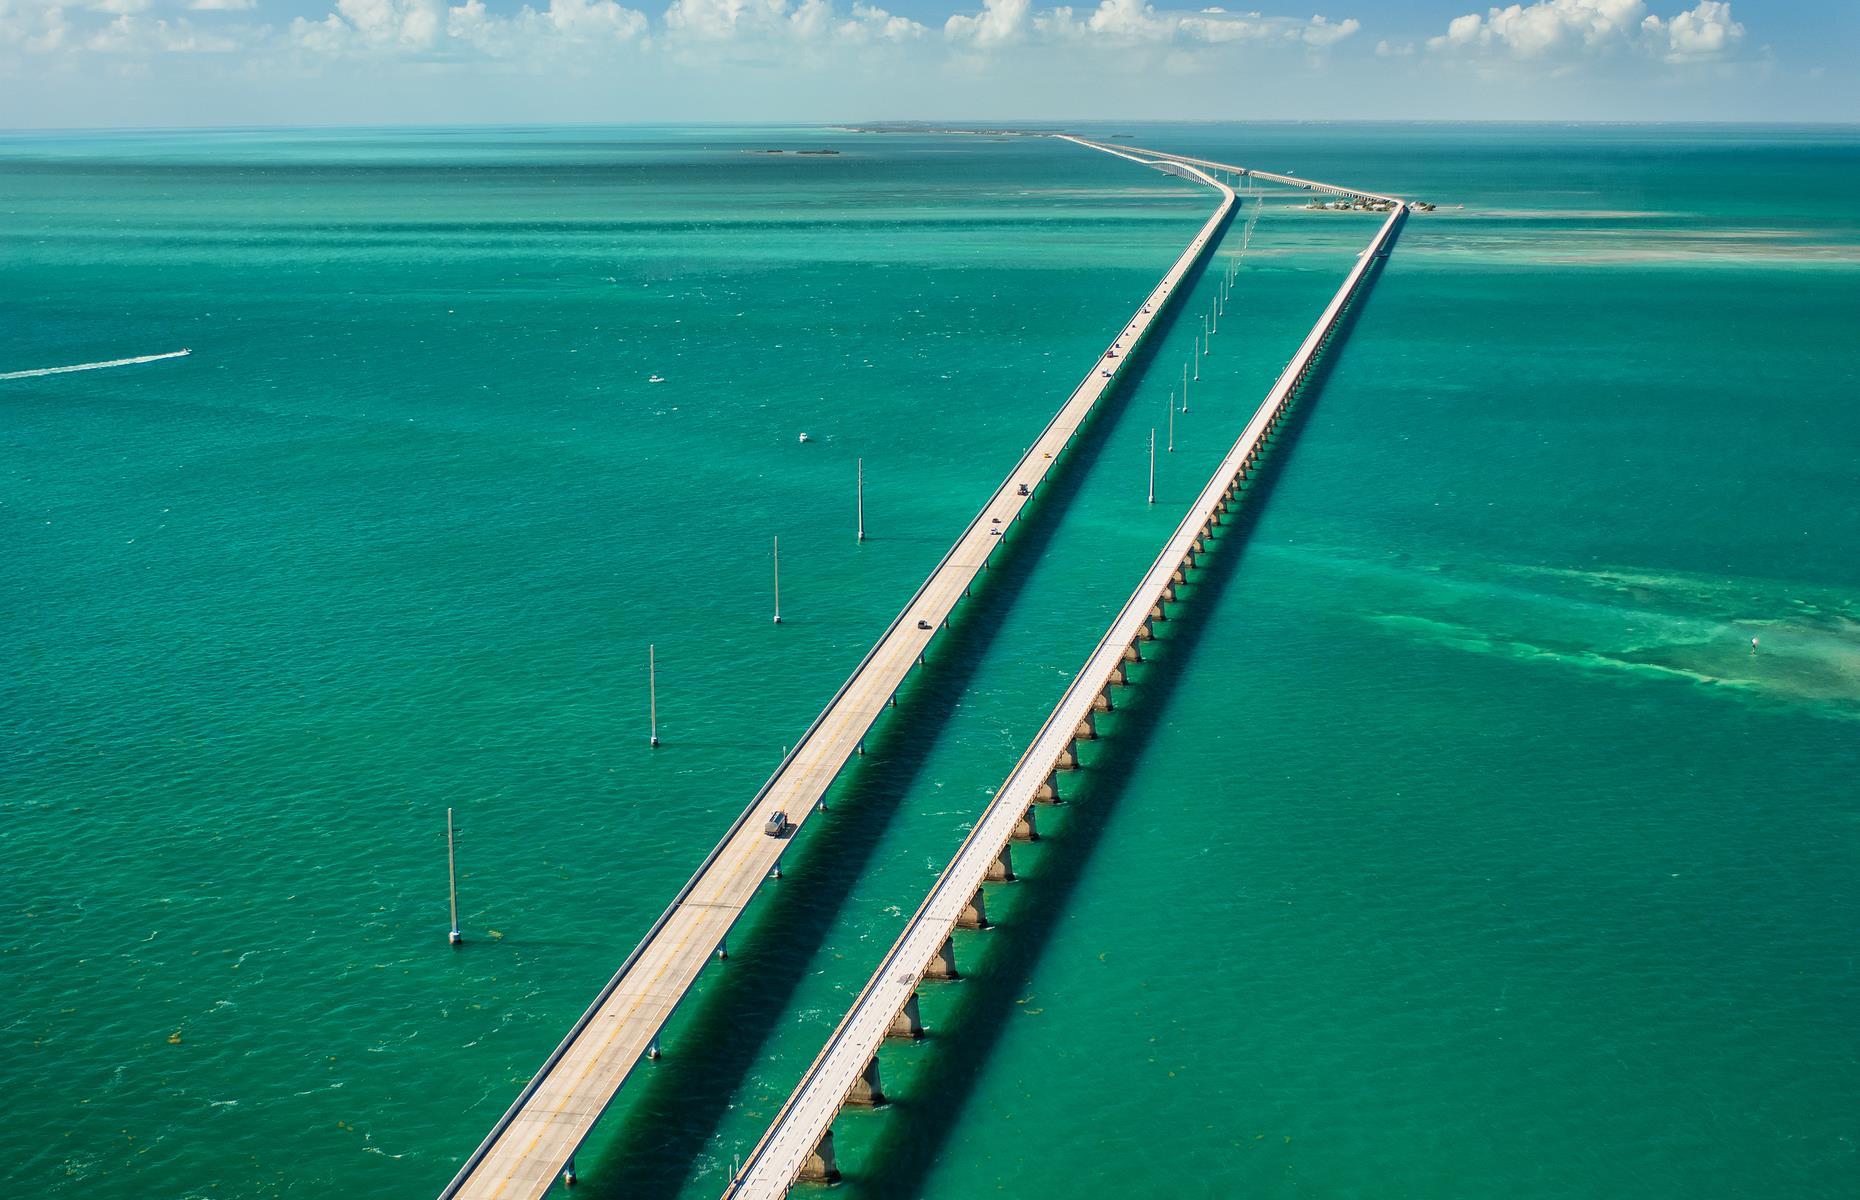 <p>One of the longest overwater roads in the world, Florida's Overseas Highway stretches from Miami on the mainland to Key West, the furthest of the islands. Completed in 1938, many sections of the highway were built over the route of the Florida East Coast Railway, which was irrevocably damaged in a hurricane. It's 113 miles (182km) long and has 42 bridges, including the famous Seven Mile Bridge. The route offers drivers magnificent views of the <a href="http://www.loveexploring.com/guides/73827/explore-the-florida-keys-where-to-stay-what-to-eat-the-top-things-to-do">Keys</a> and the Florida Straits. </p>